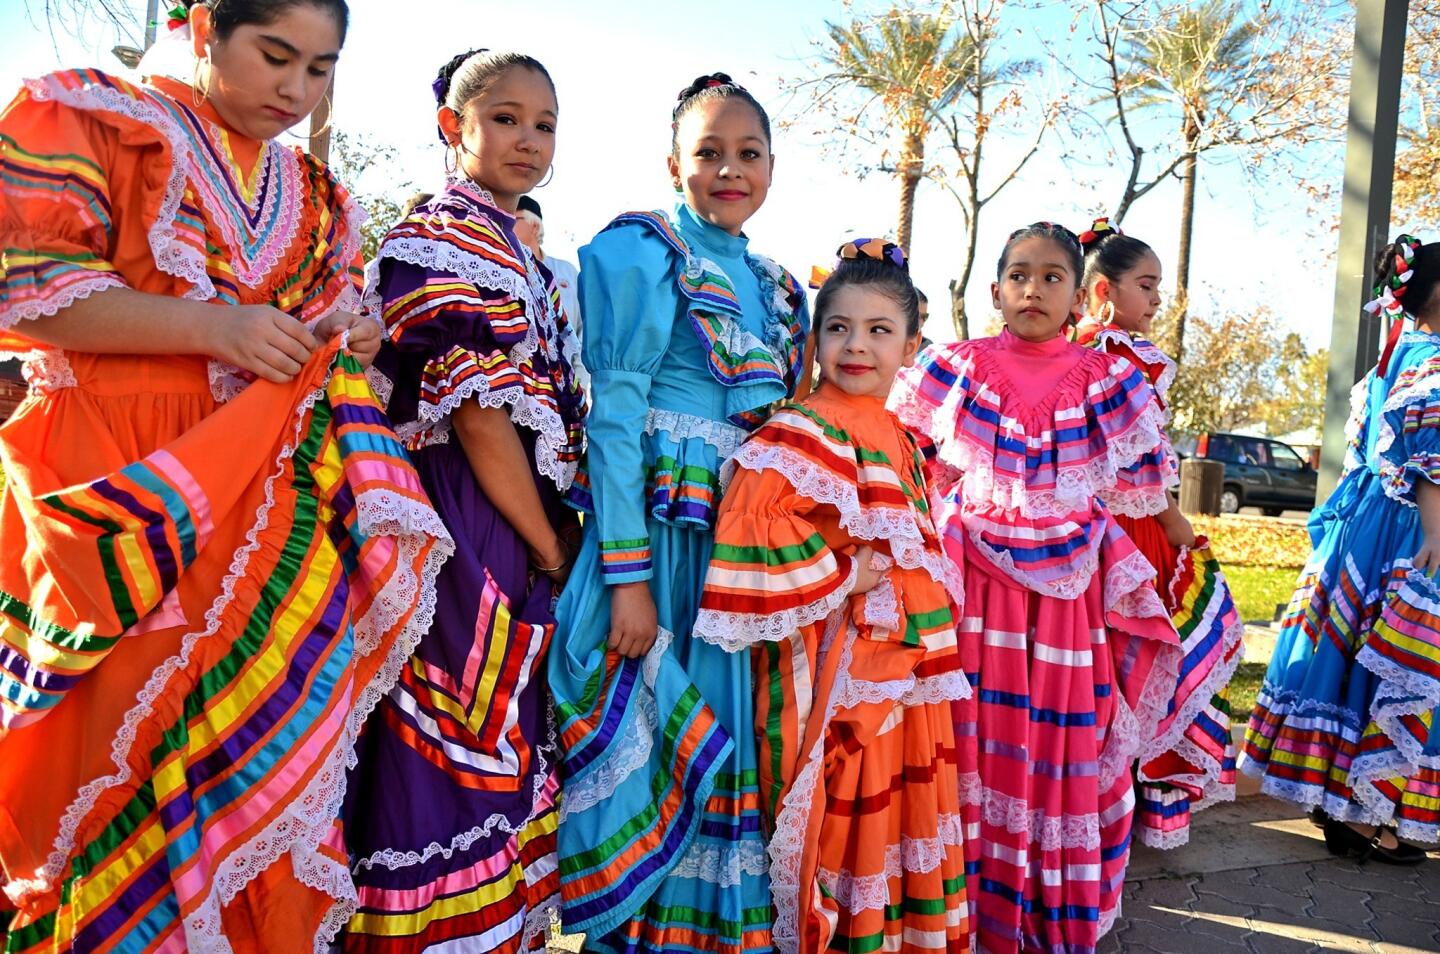 Si Se Puede folkloric dancers prepare to perform at a multicultural festival in the Phoenix suburb of Chandler, Ariz.